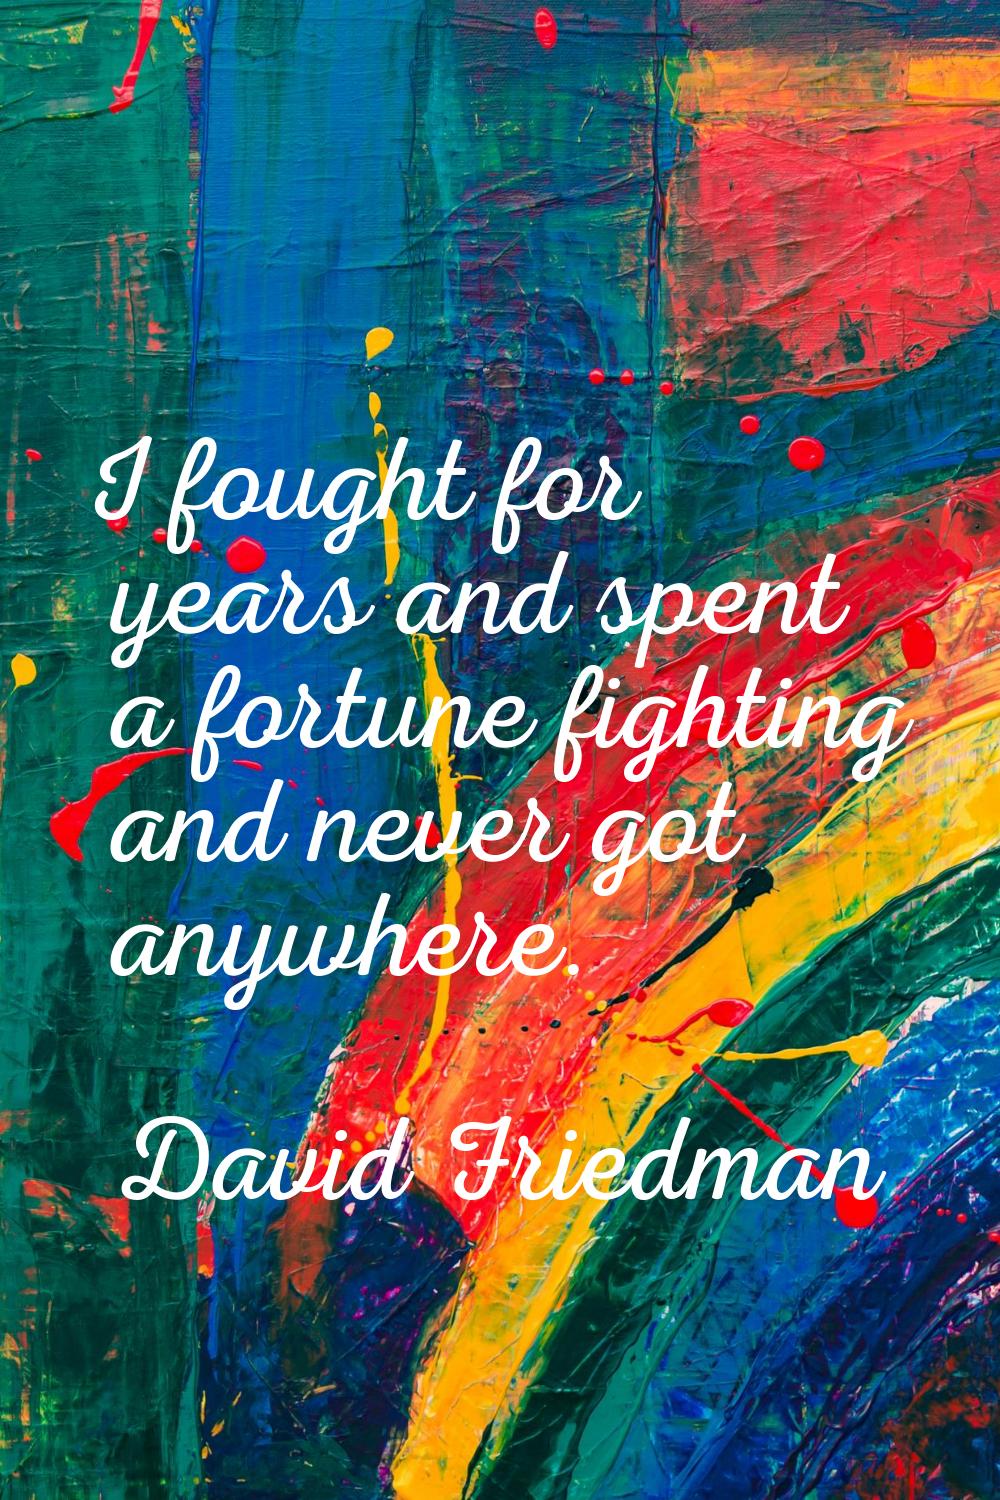 I fought for years and spent a fortune fighting and never got anywhere.